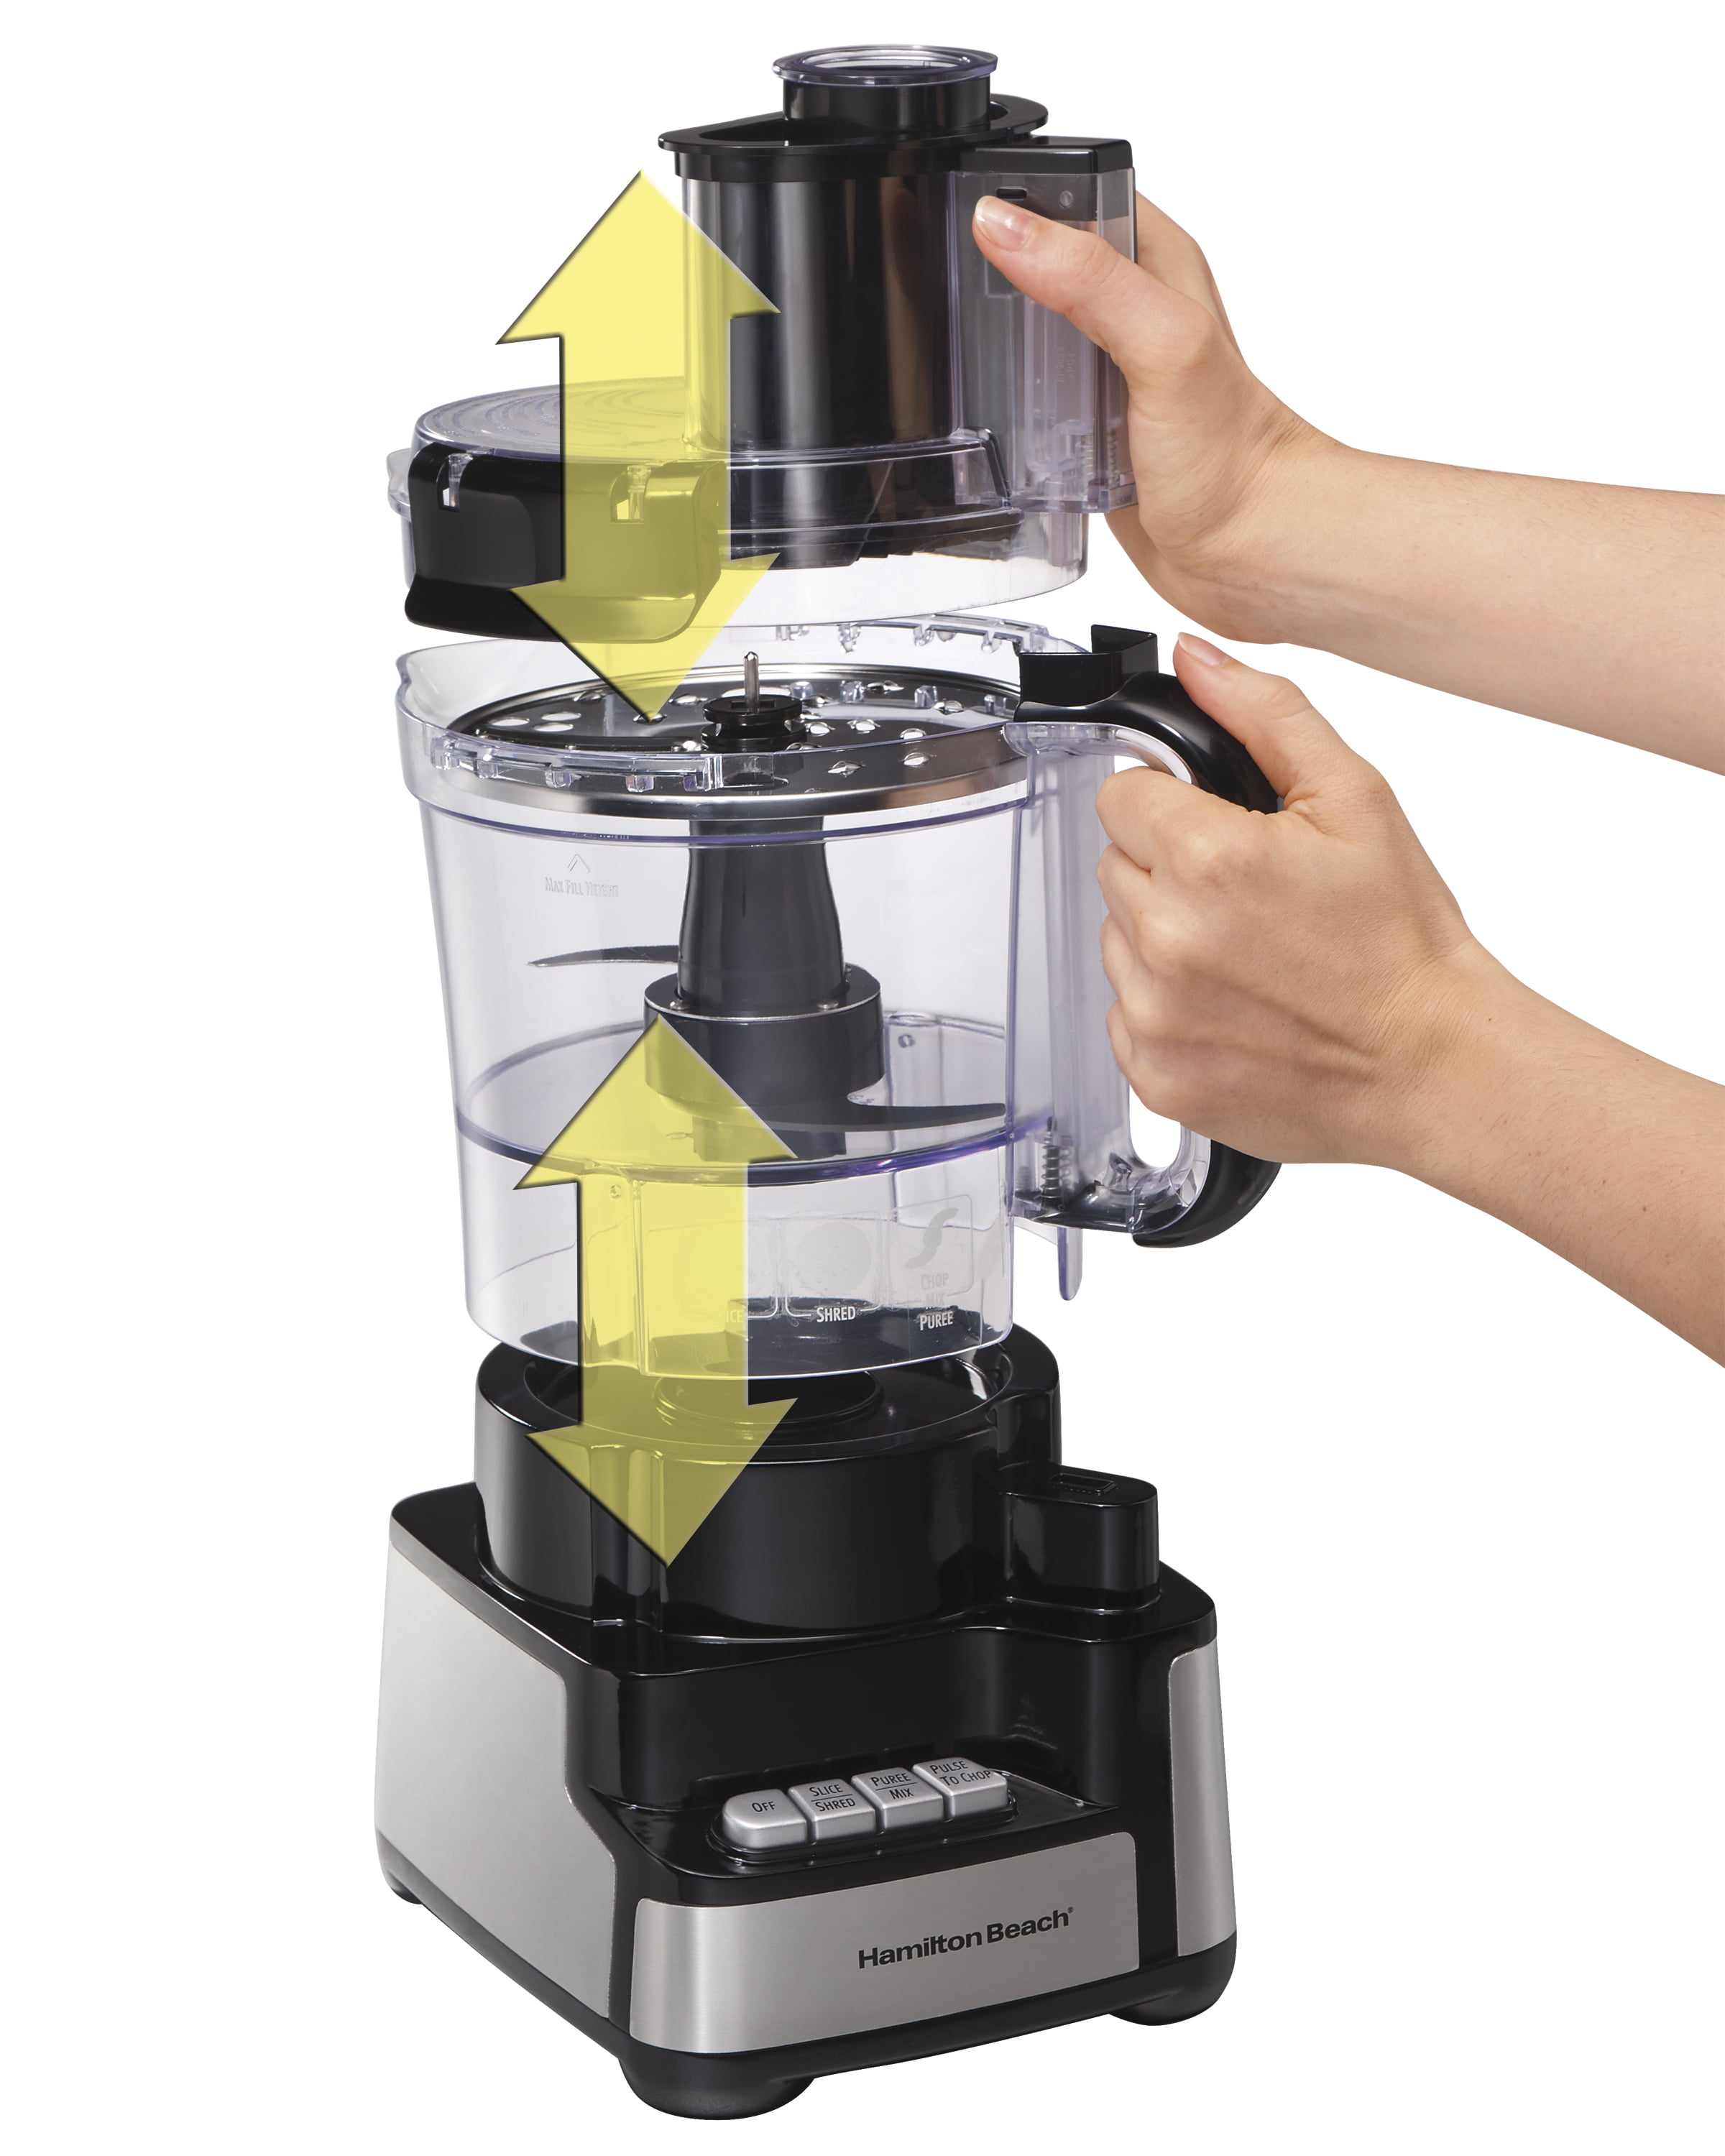 Hamilton Beach Stack & Snap Food Processor and Vegetable Chopper, BPA Free,  Stainless Steel Blades, 12 Cup Bowl, 2-Speed 450 Watt Motor, Black (70725A  for Sale in Arlington, TX - OfferUp